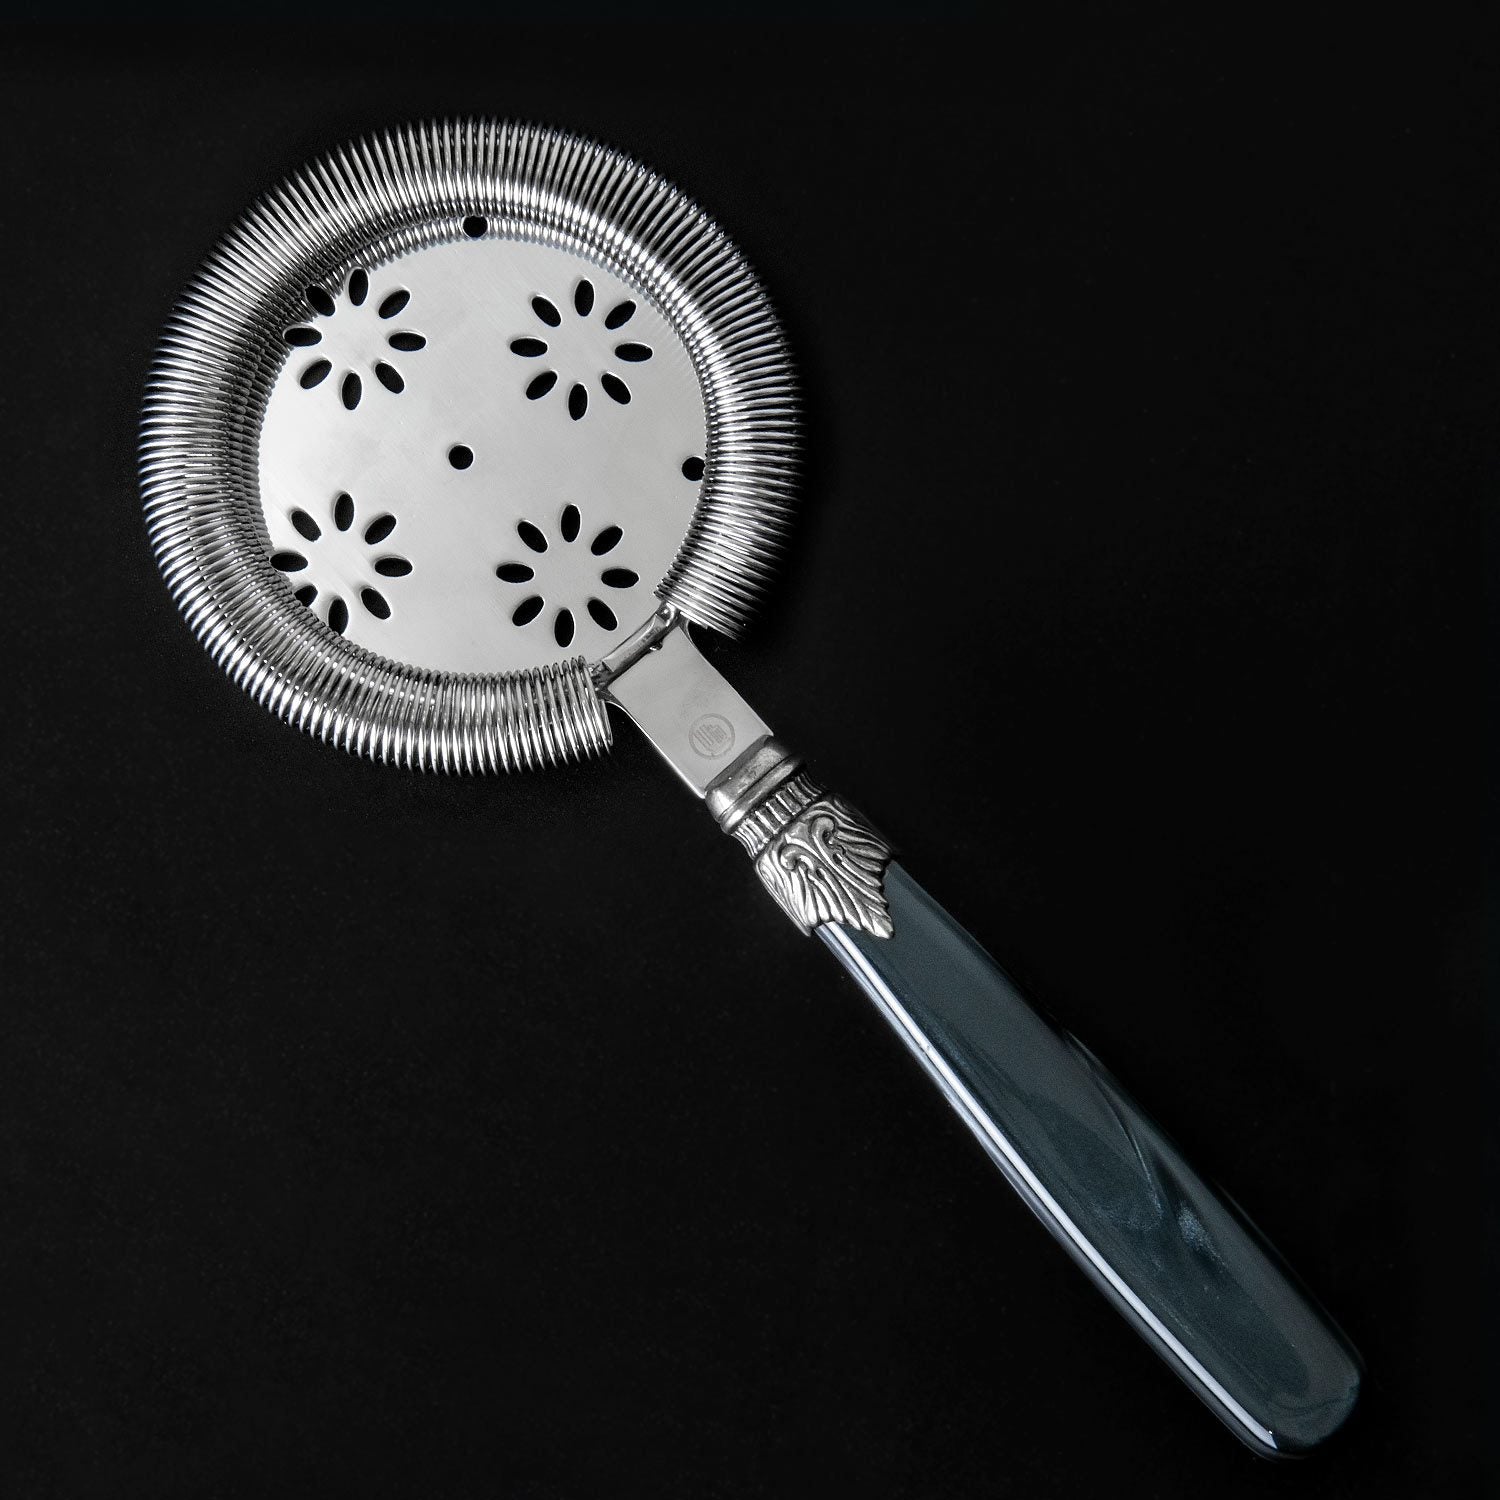 Classico Stainless Steel Hawthorne Cocktail Strainer Internal Fitting